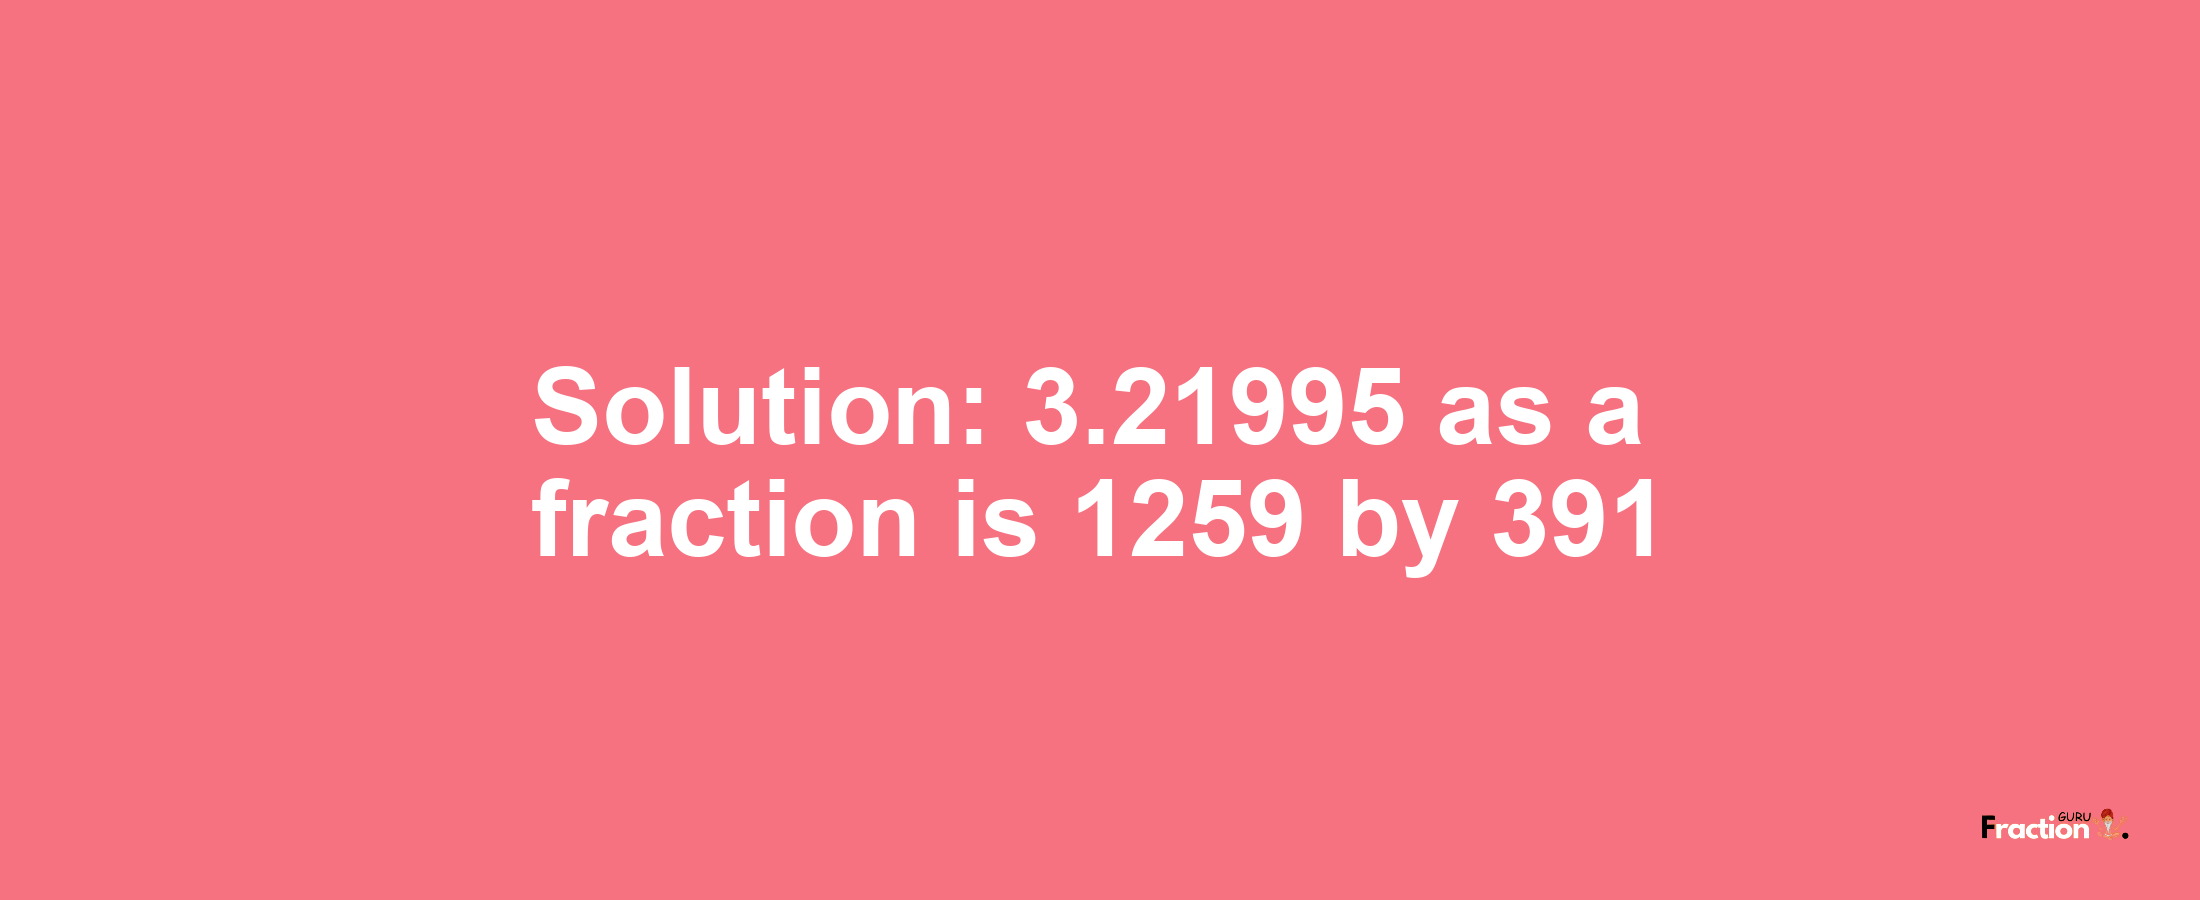 Solution:3.21995 as a fraction is 1259/391